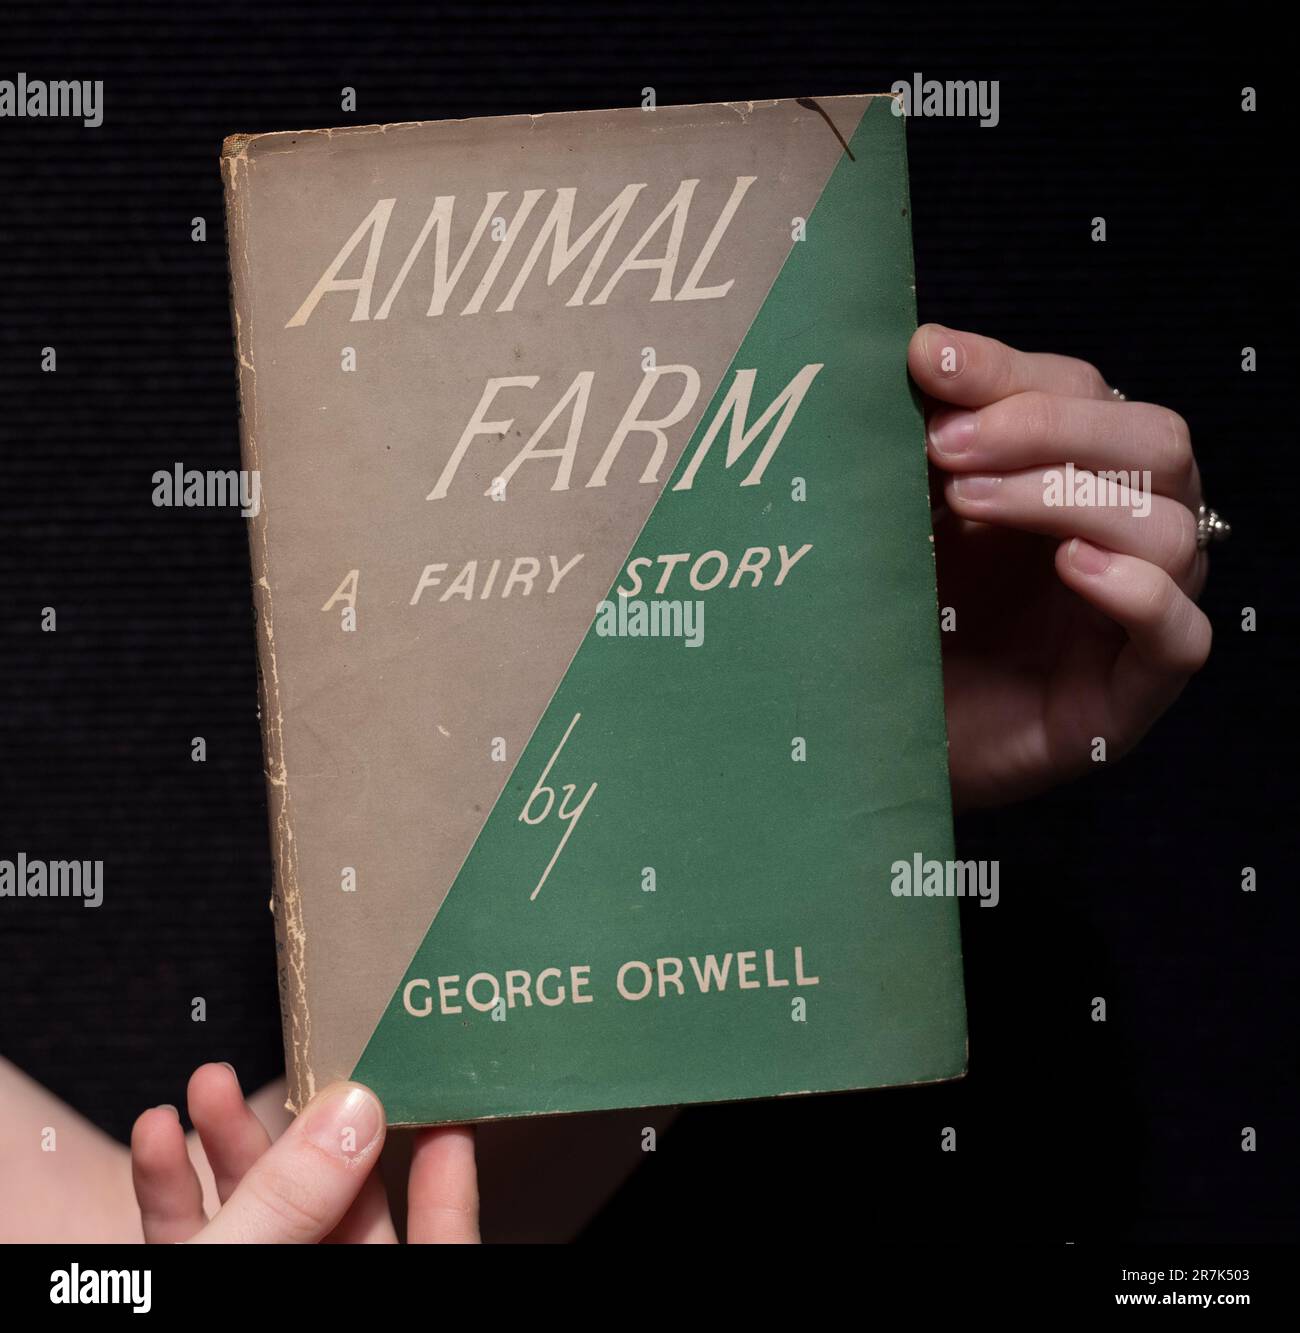 Bonhams, Knightsbridge, London, UK. 16th June, 2023. The Fine Books & Manuscripts sale takes place on 21 June. Highlights include: George Orwell, Animal Farm. A Fairy Story, First Edition, First Issue, Secker & Warburg, 1945, estimate £2,000-3,000. Credit: Malcolm Park/Alamy Live News Stock Photo